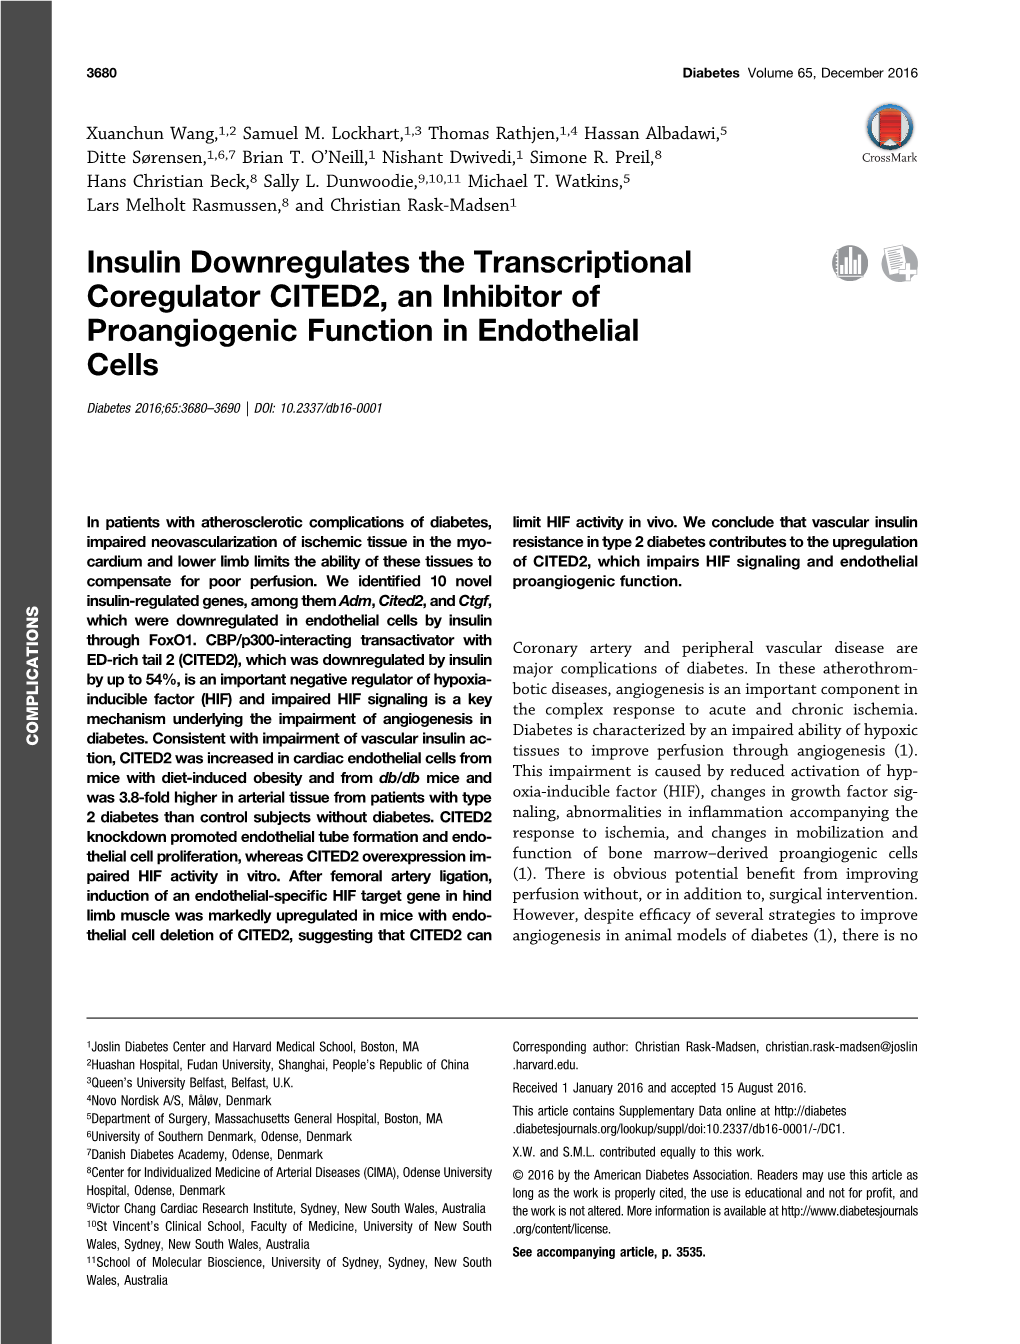 Insulin Downregulates the Transcriptional Coregulator CITED2, an Inhibitor of Proangiogenic Function in Endothelial Cells